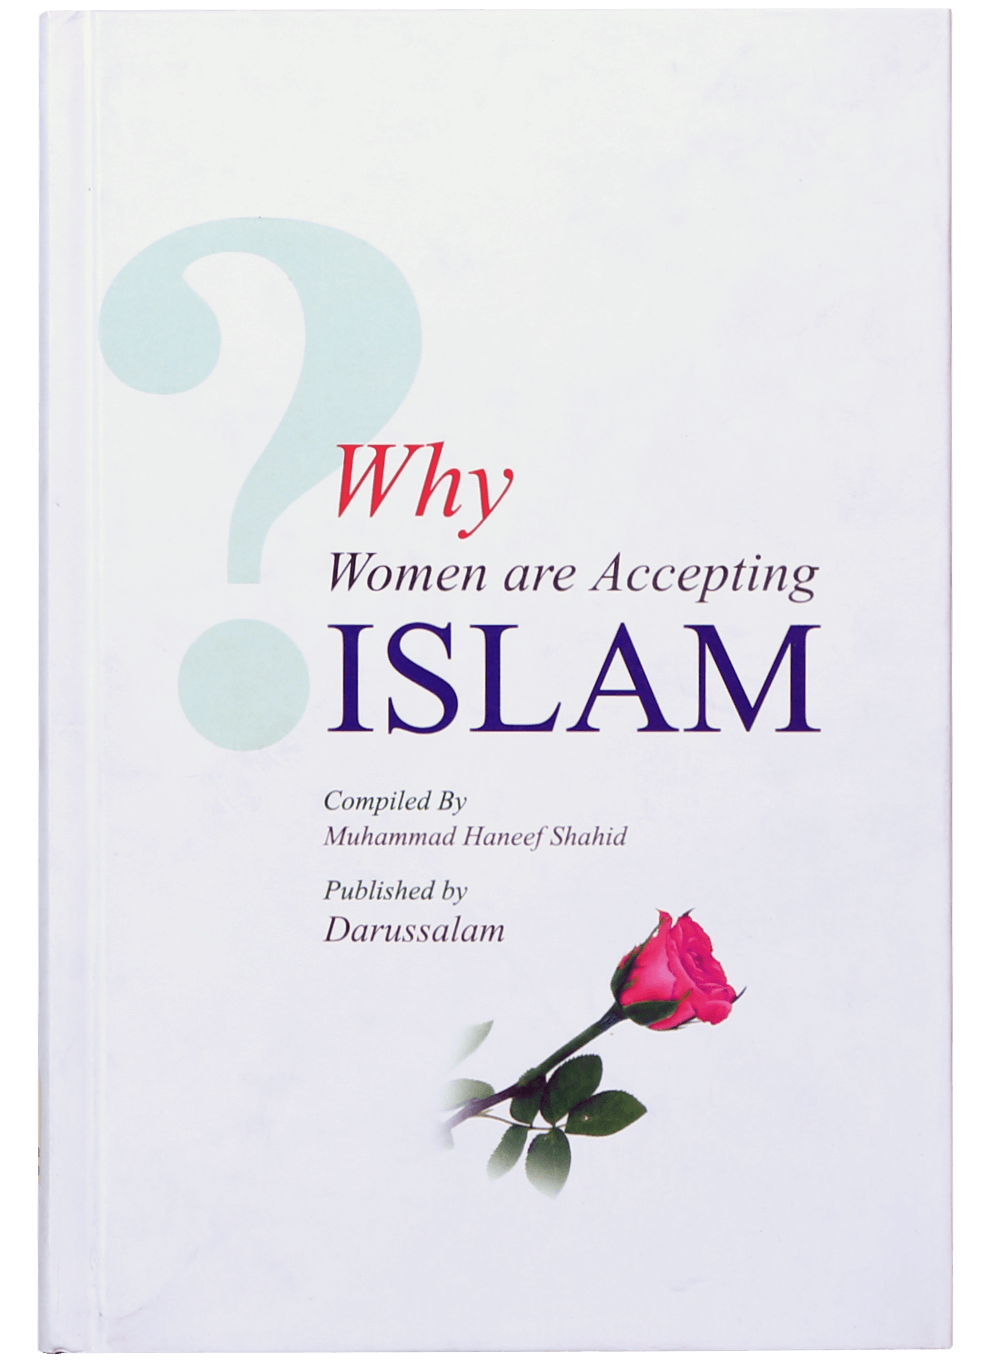 darussalam-2017-10-04-12-03-20why-women-are-accepting-islam-(1)